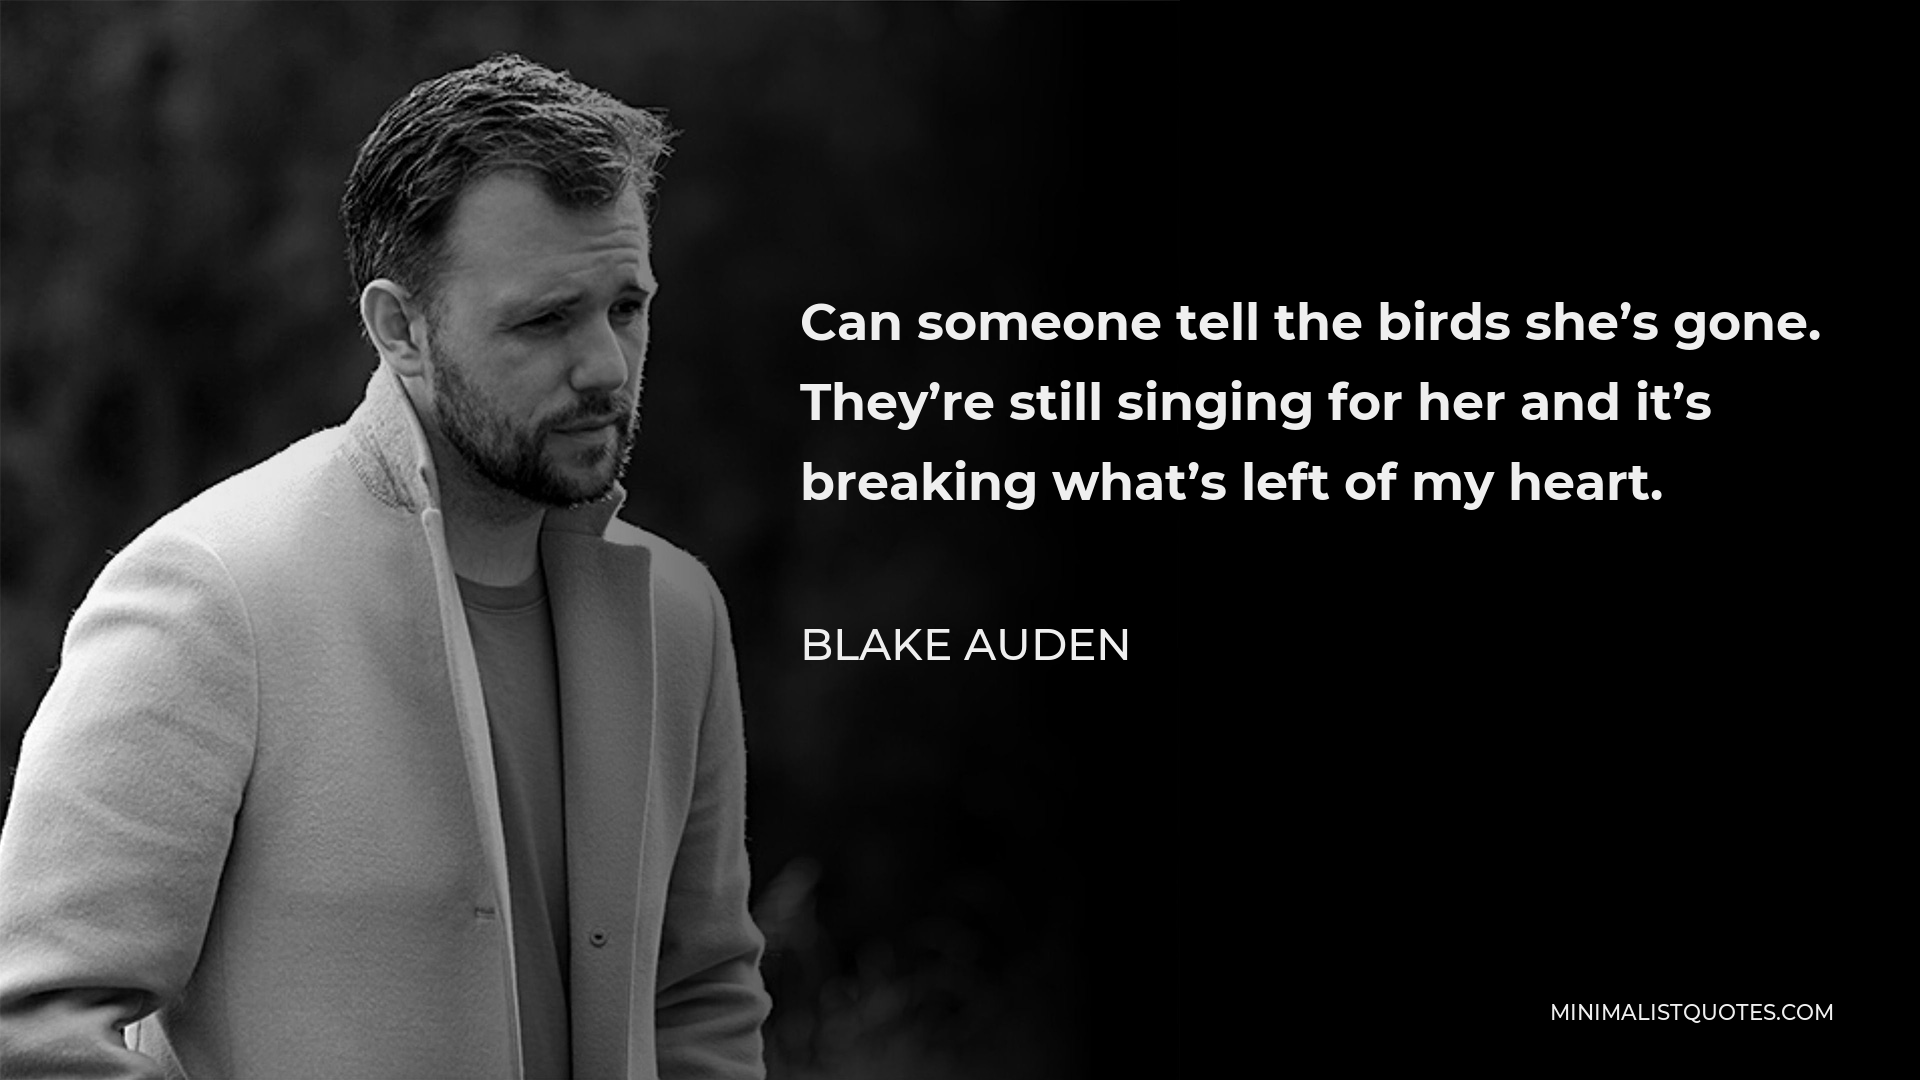 Blake Auden Quote - Can someone tell the birds she’s gone. They’re still singing for her and it’s breaking what’s left of my heart.